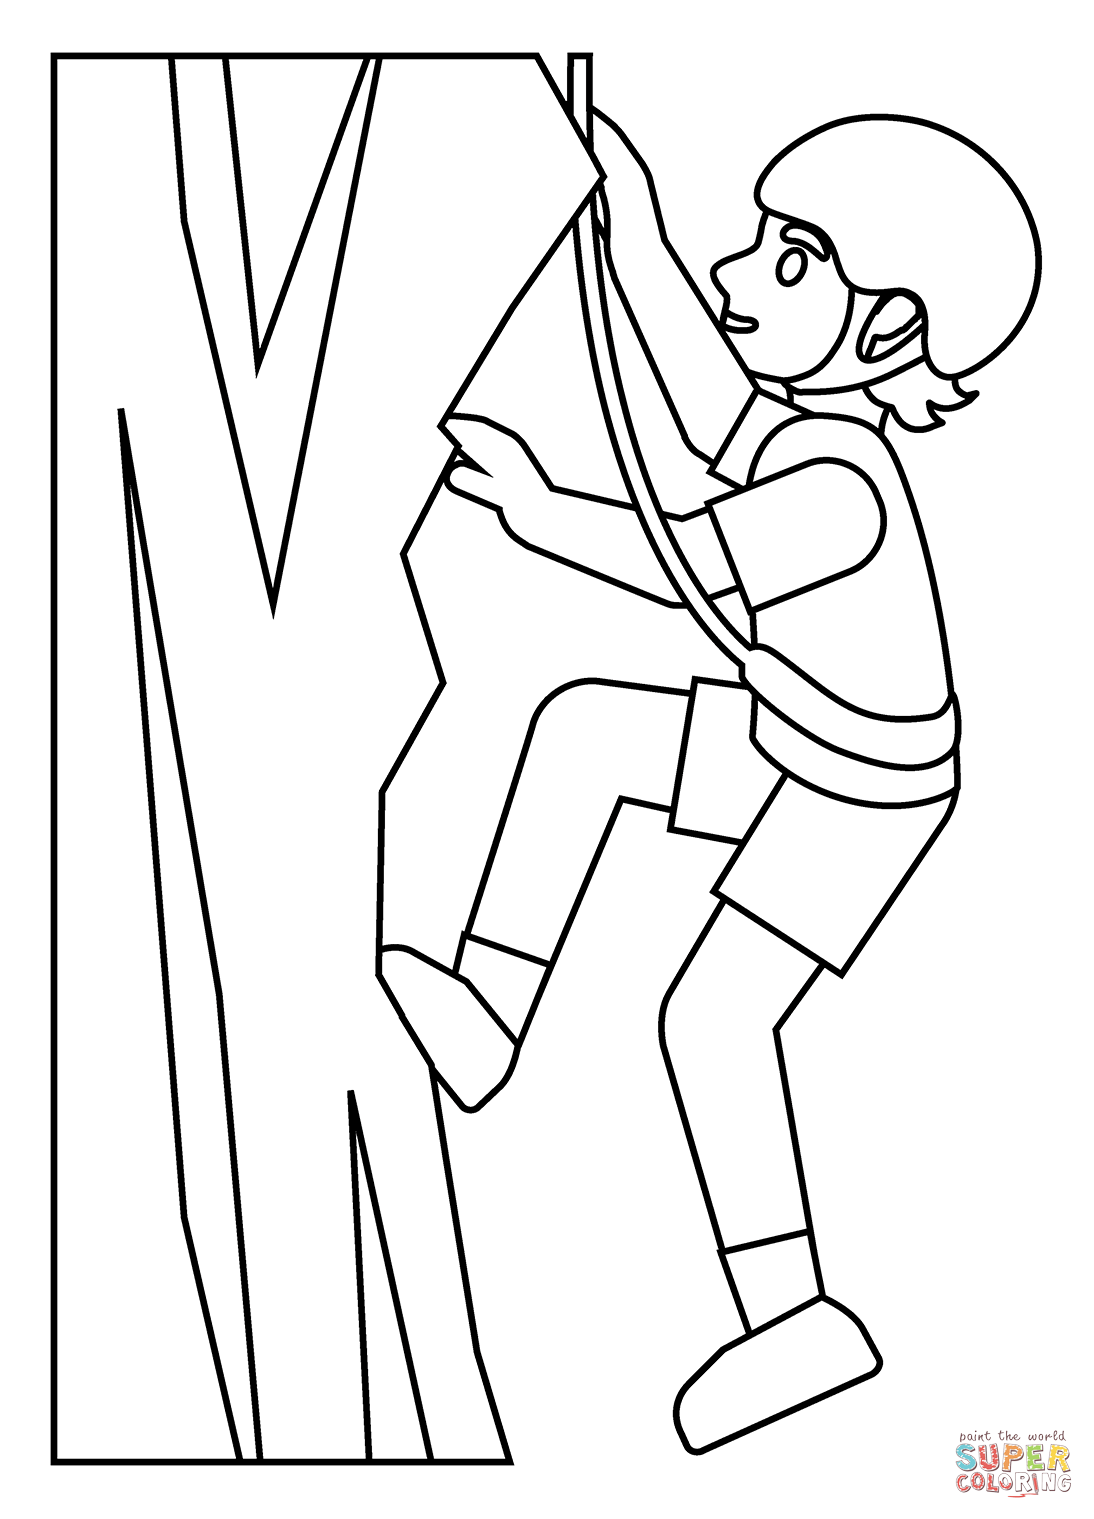 Person Climbing Emoji coloring page | Free Printable Coloring Pages